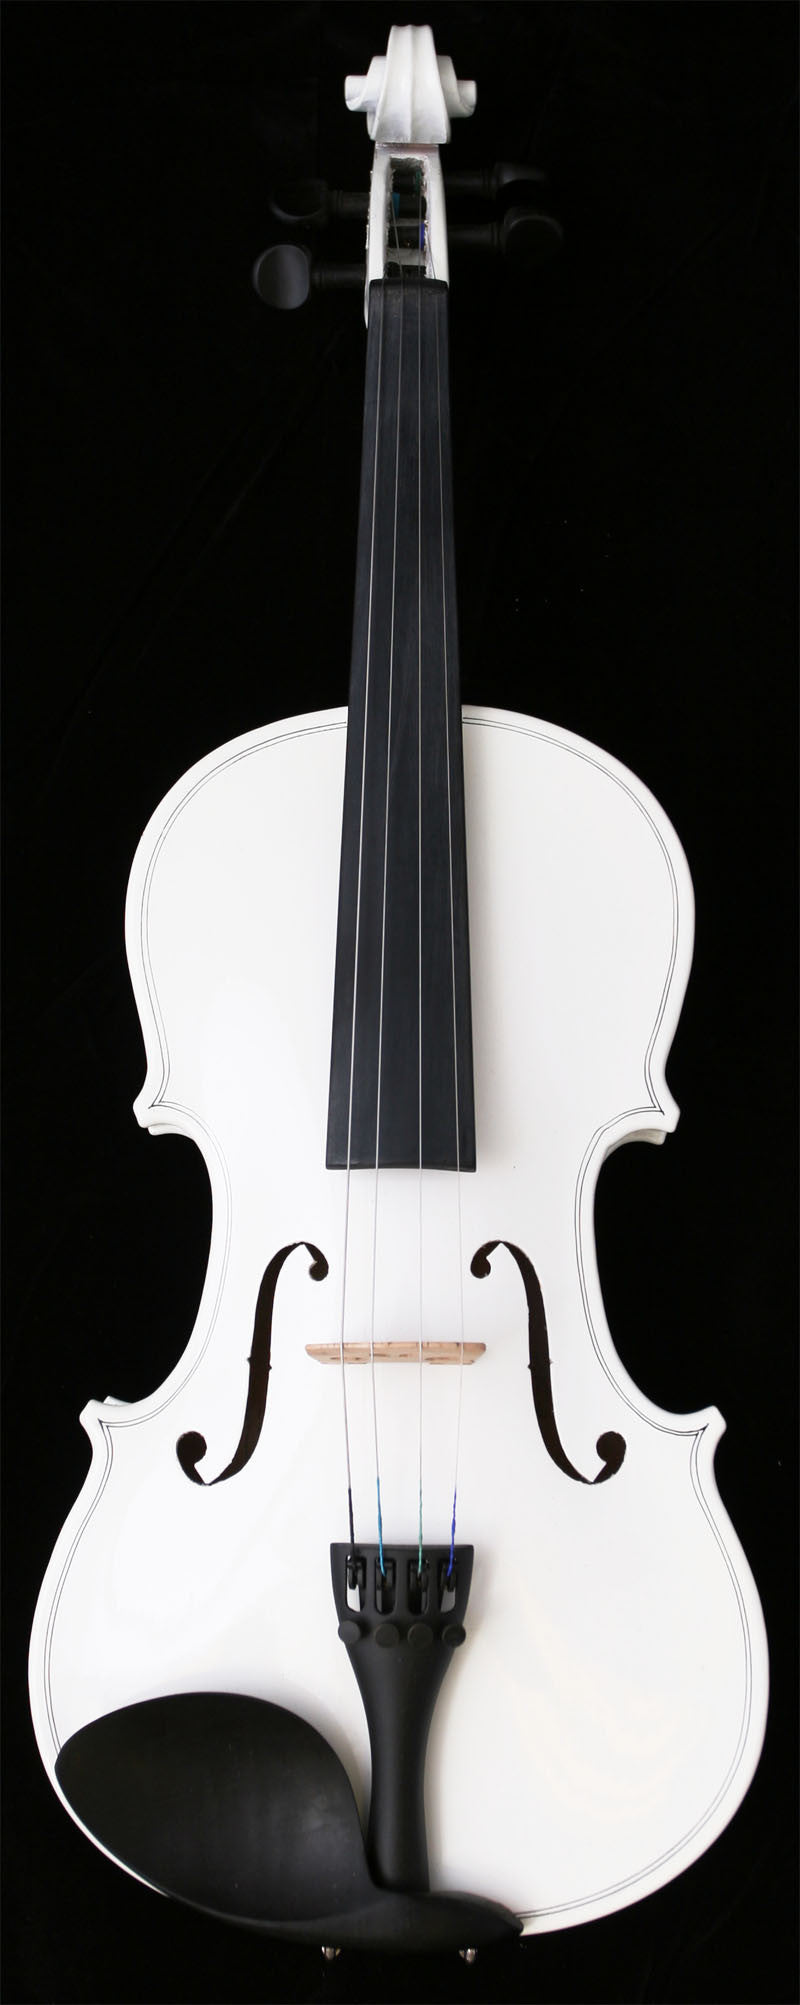 Crescent Direct Vl-wt1/4 1/4 White Maplewood Acoustic Violin With Case, Rosin, And Bow